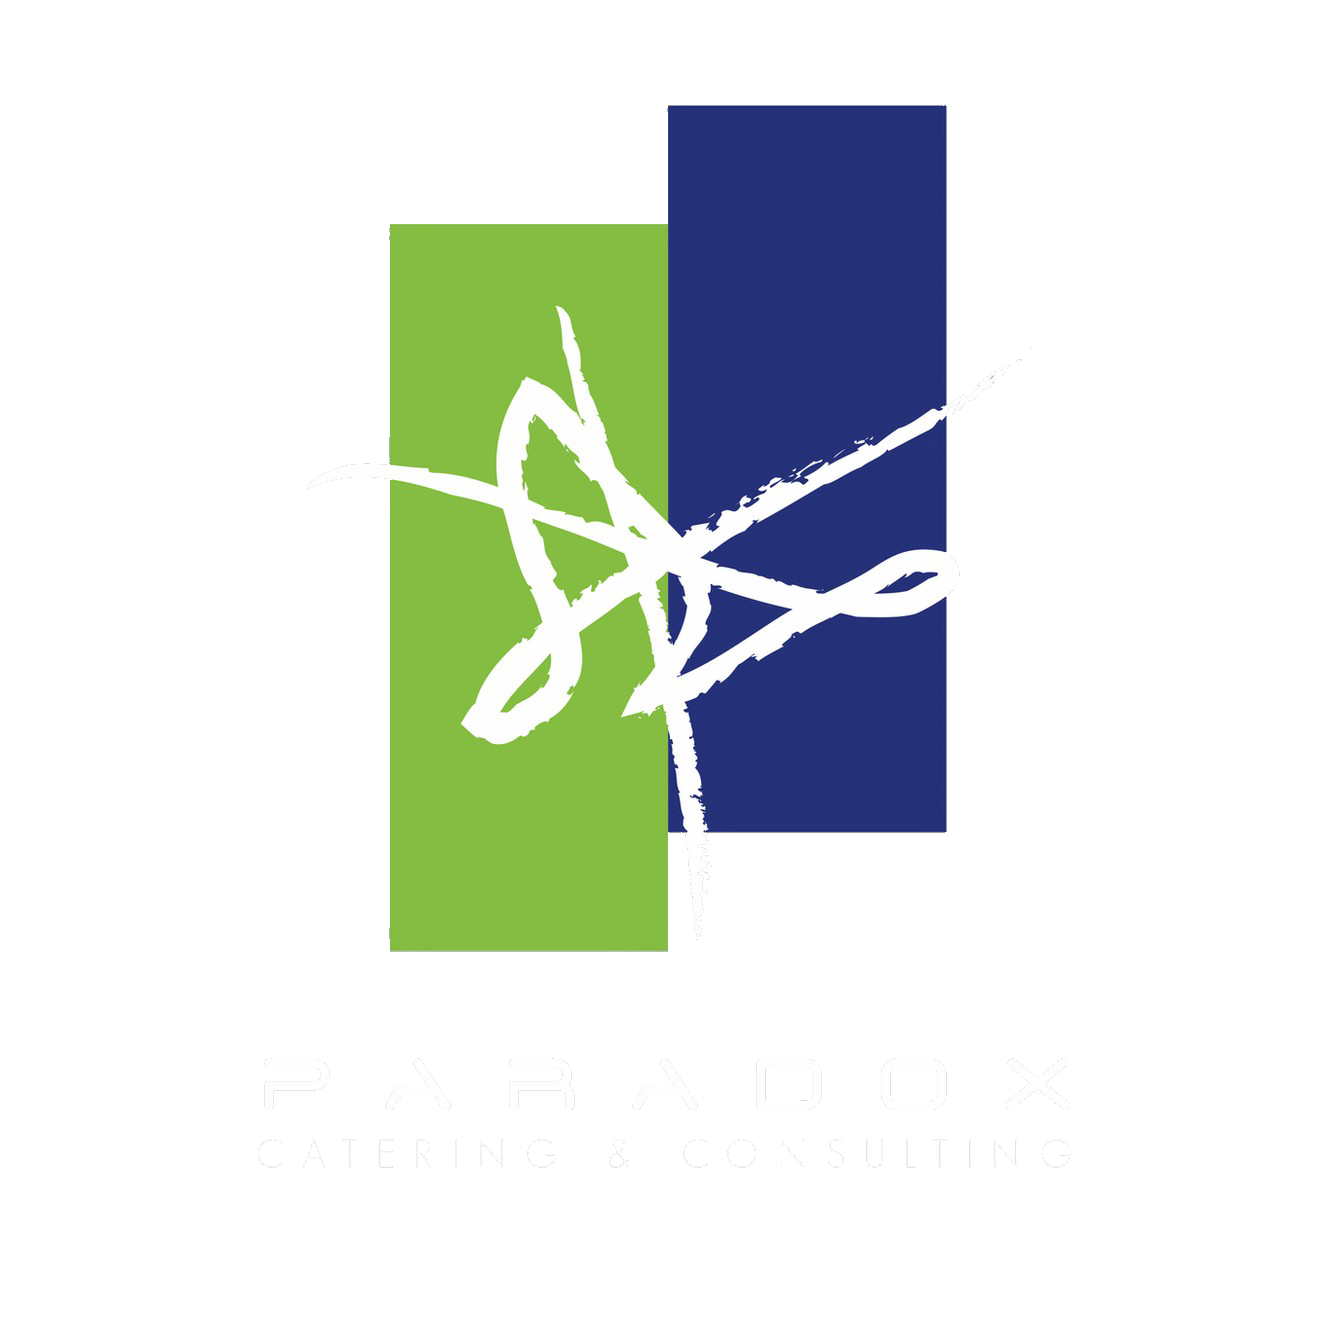 paradox catering & consulting sponsor logo.png